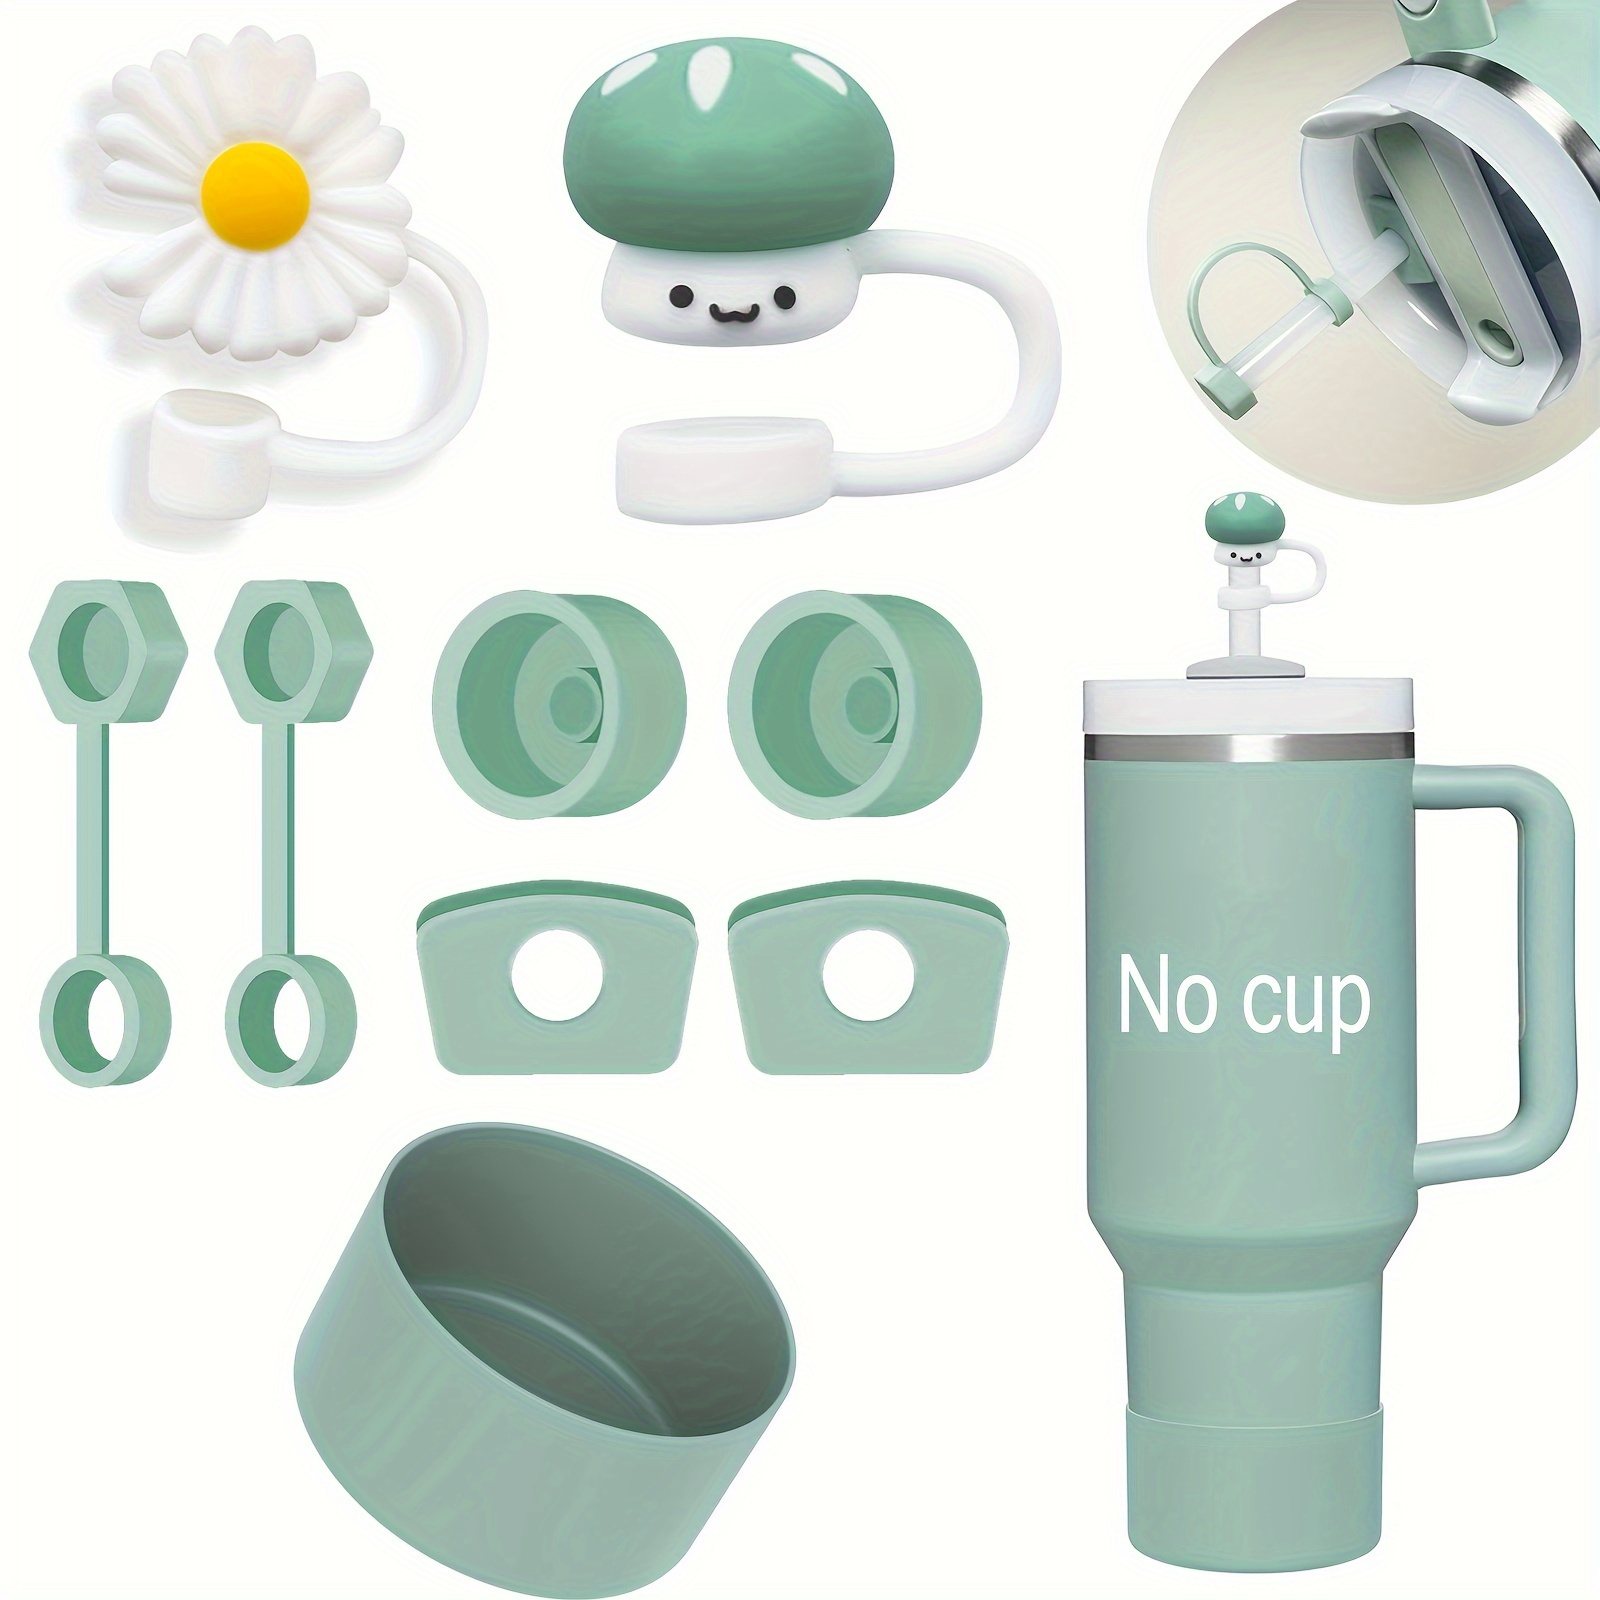 

Stanley Cup Accessories Set, Including 6pcs Silicone Spill Proof Stopper, 2pcs Straw Cover Cap For 9-10mm Straws, 1pc Silicone Cup Boot For Stanley Cup 40oz & 30oz Tumbler (green)